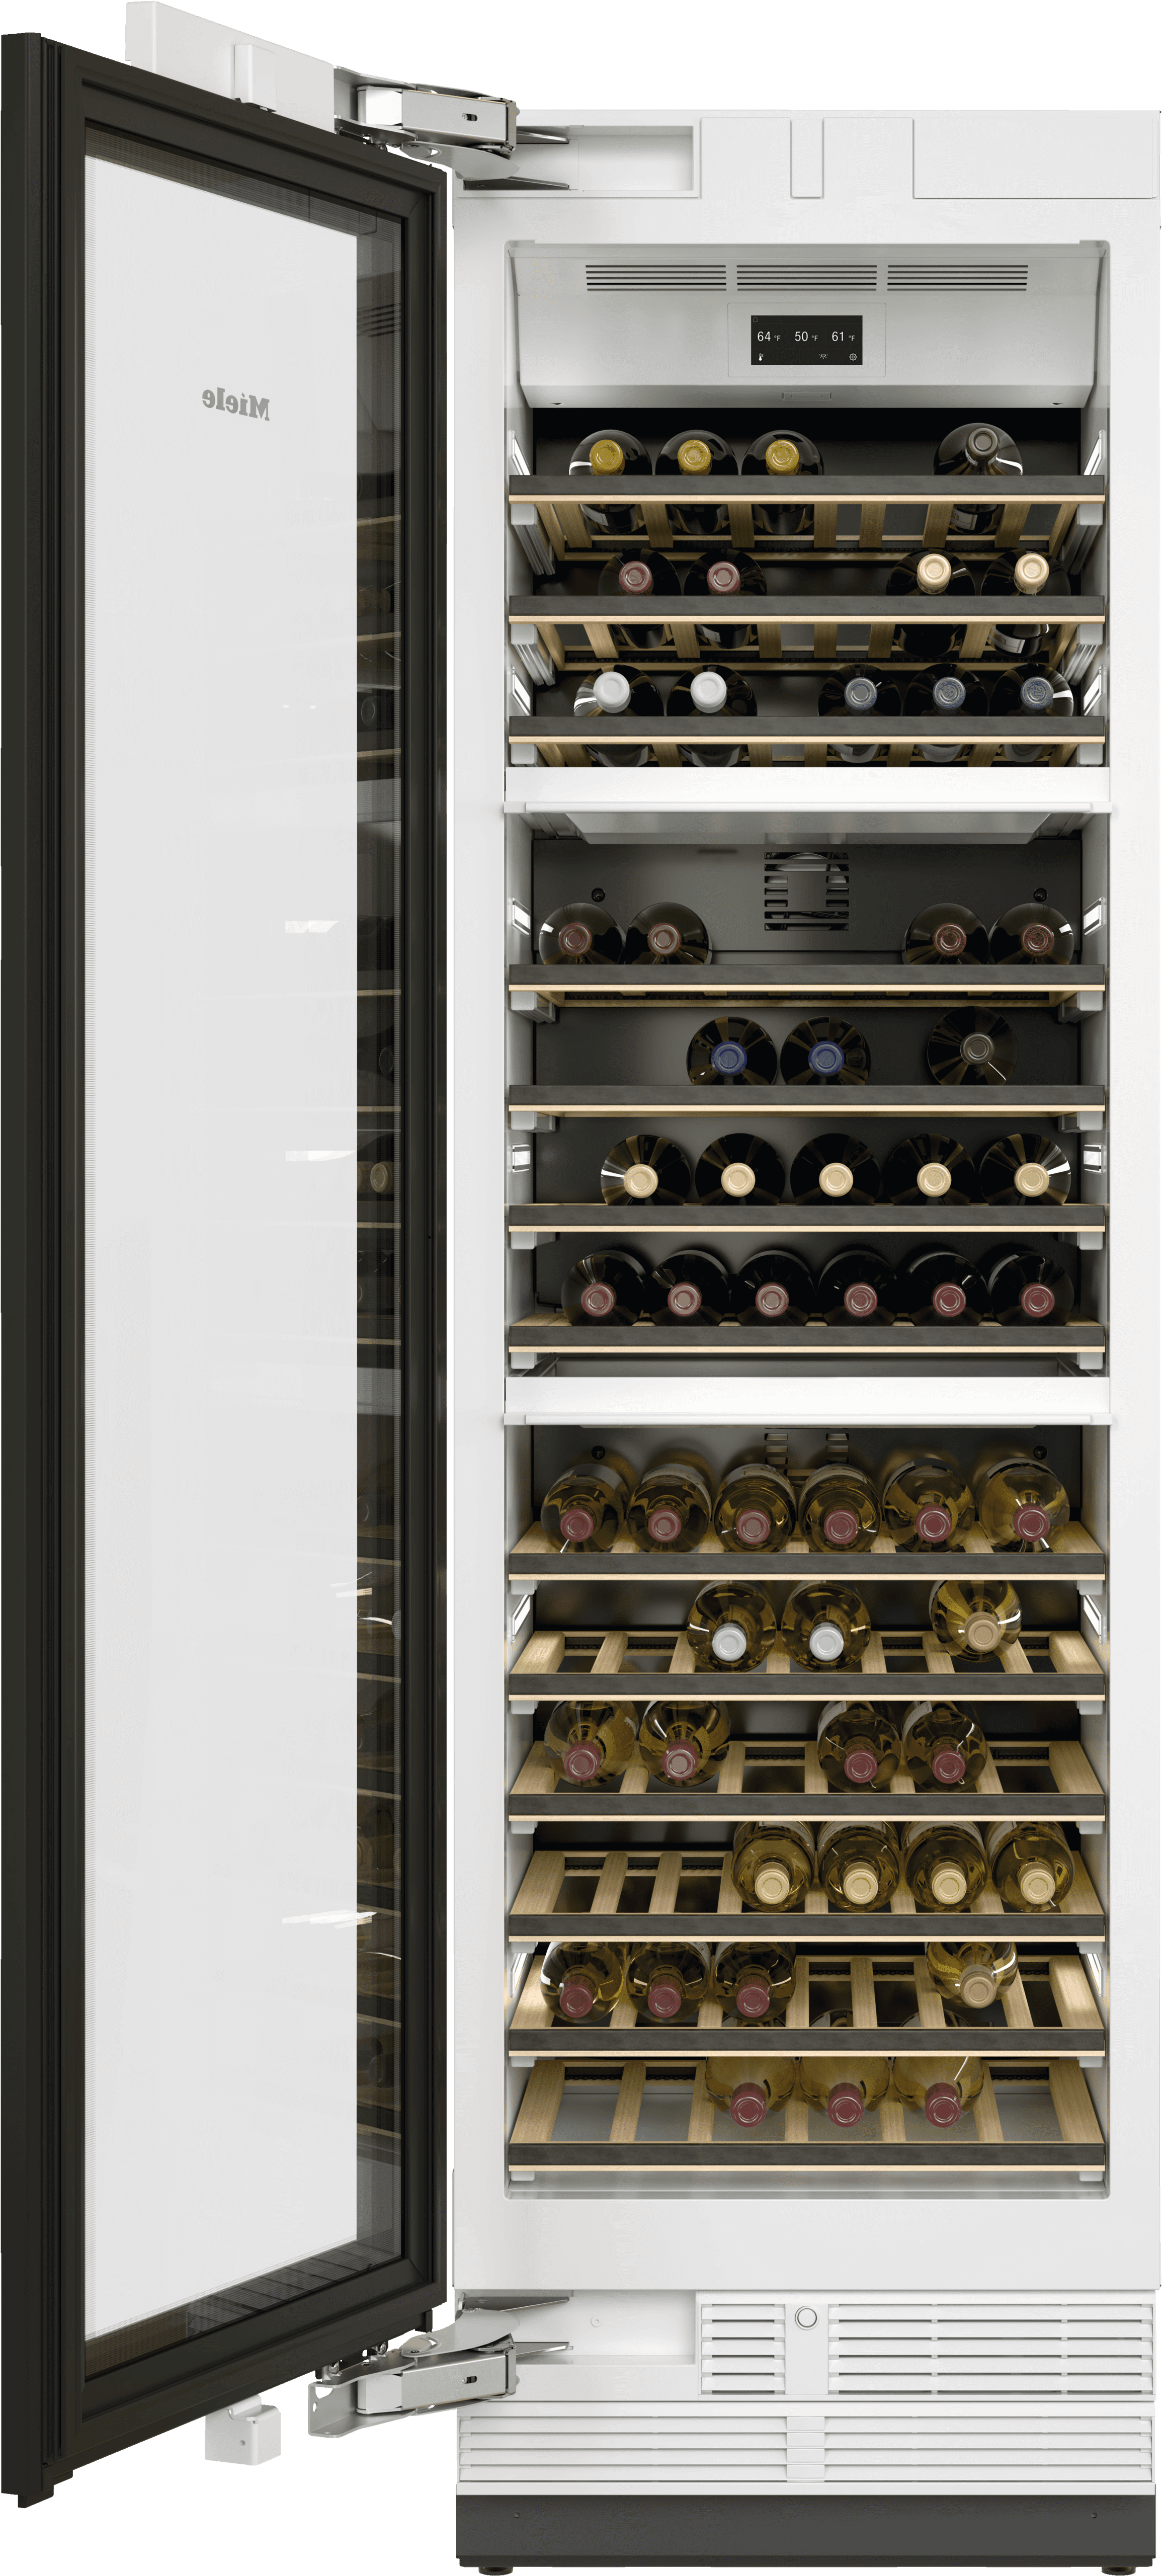 Miele KWT2612VI Kwt 2612 Vi - Mastercool Wine Conditioning Unit For High-End Design And Technology On A Large Scale.